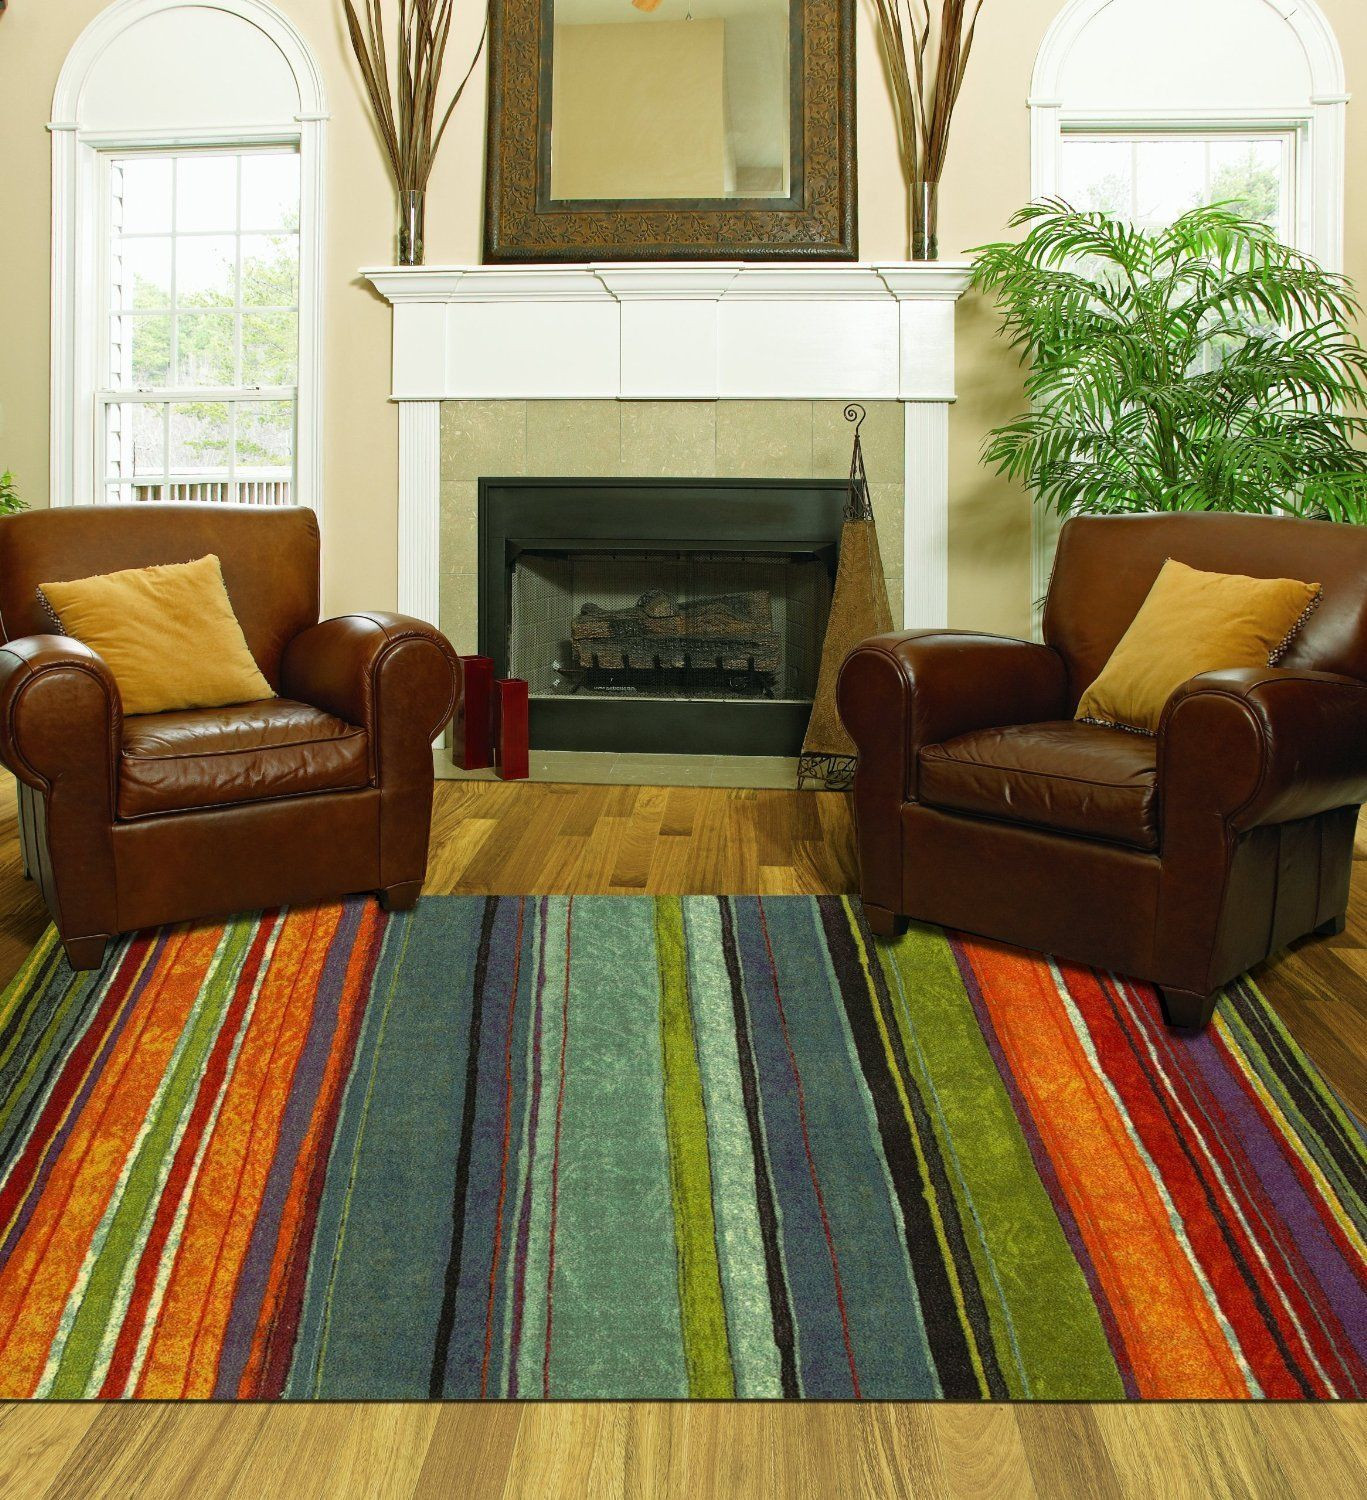 Accent Rugs For Living Room
 Area Rug Colorful 8x10 Living Room Size Carpet Home